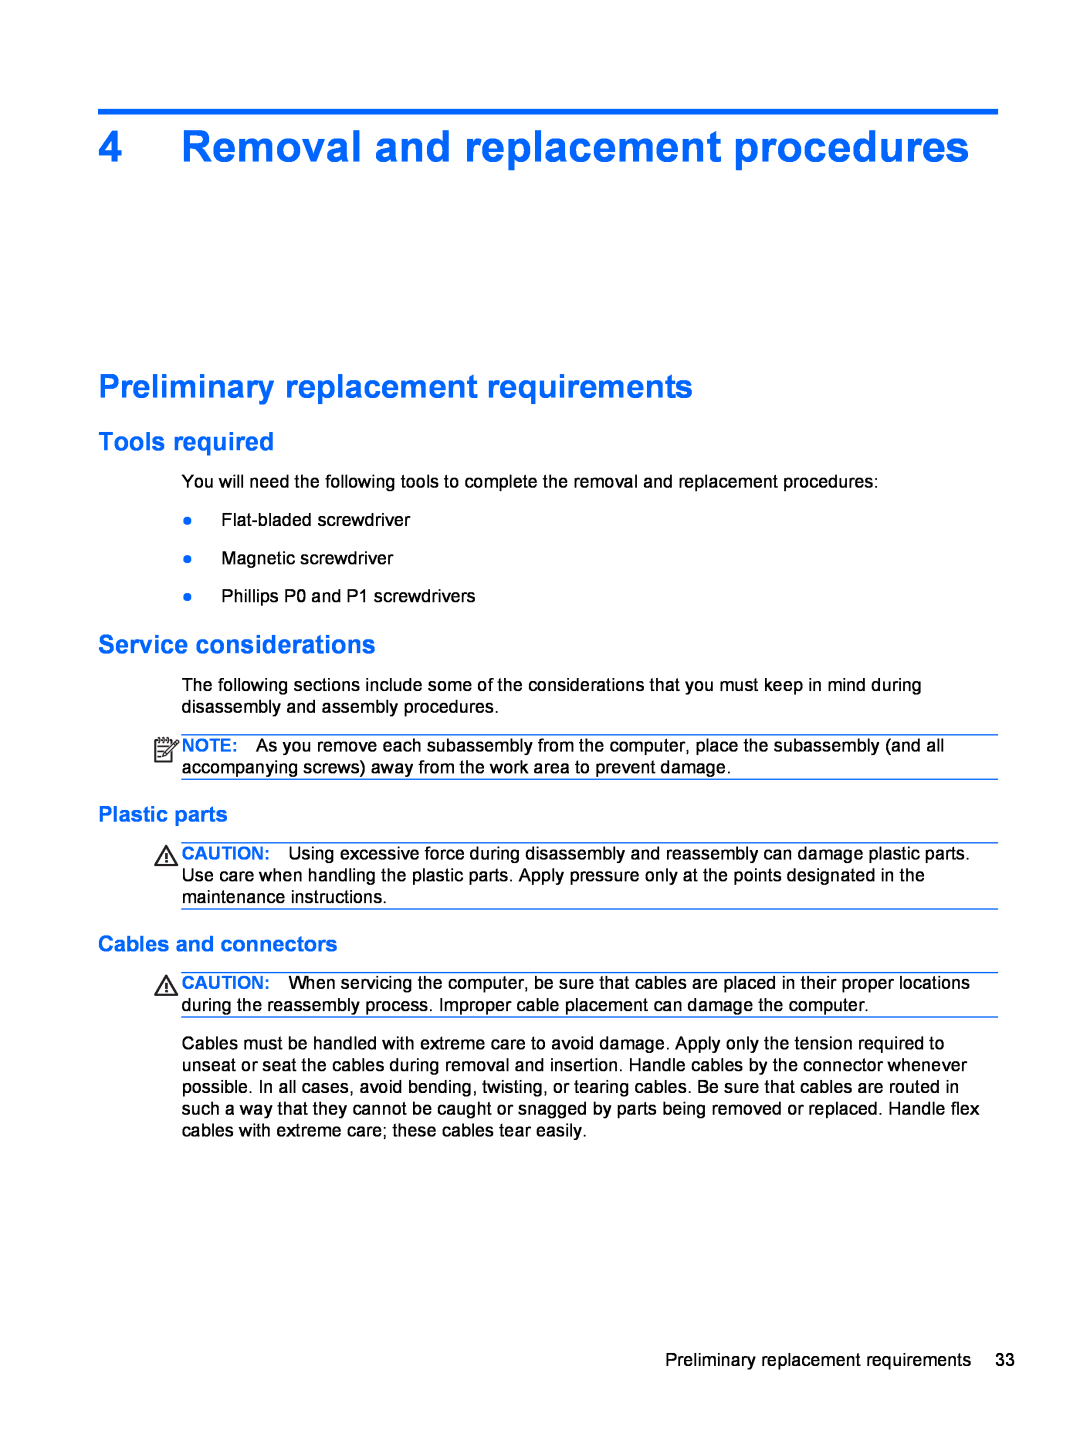 HP 2000 Removal and replacement procedures, Preliminary replacement requirements, Tools required, Service considerations 